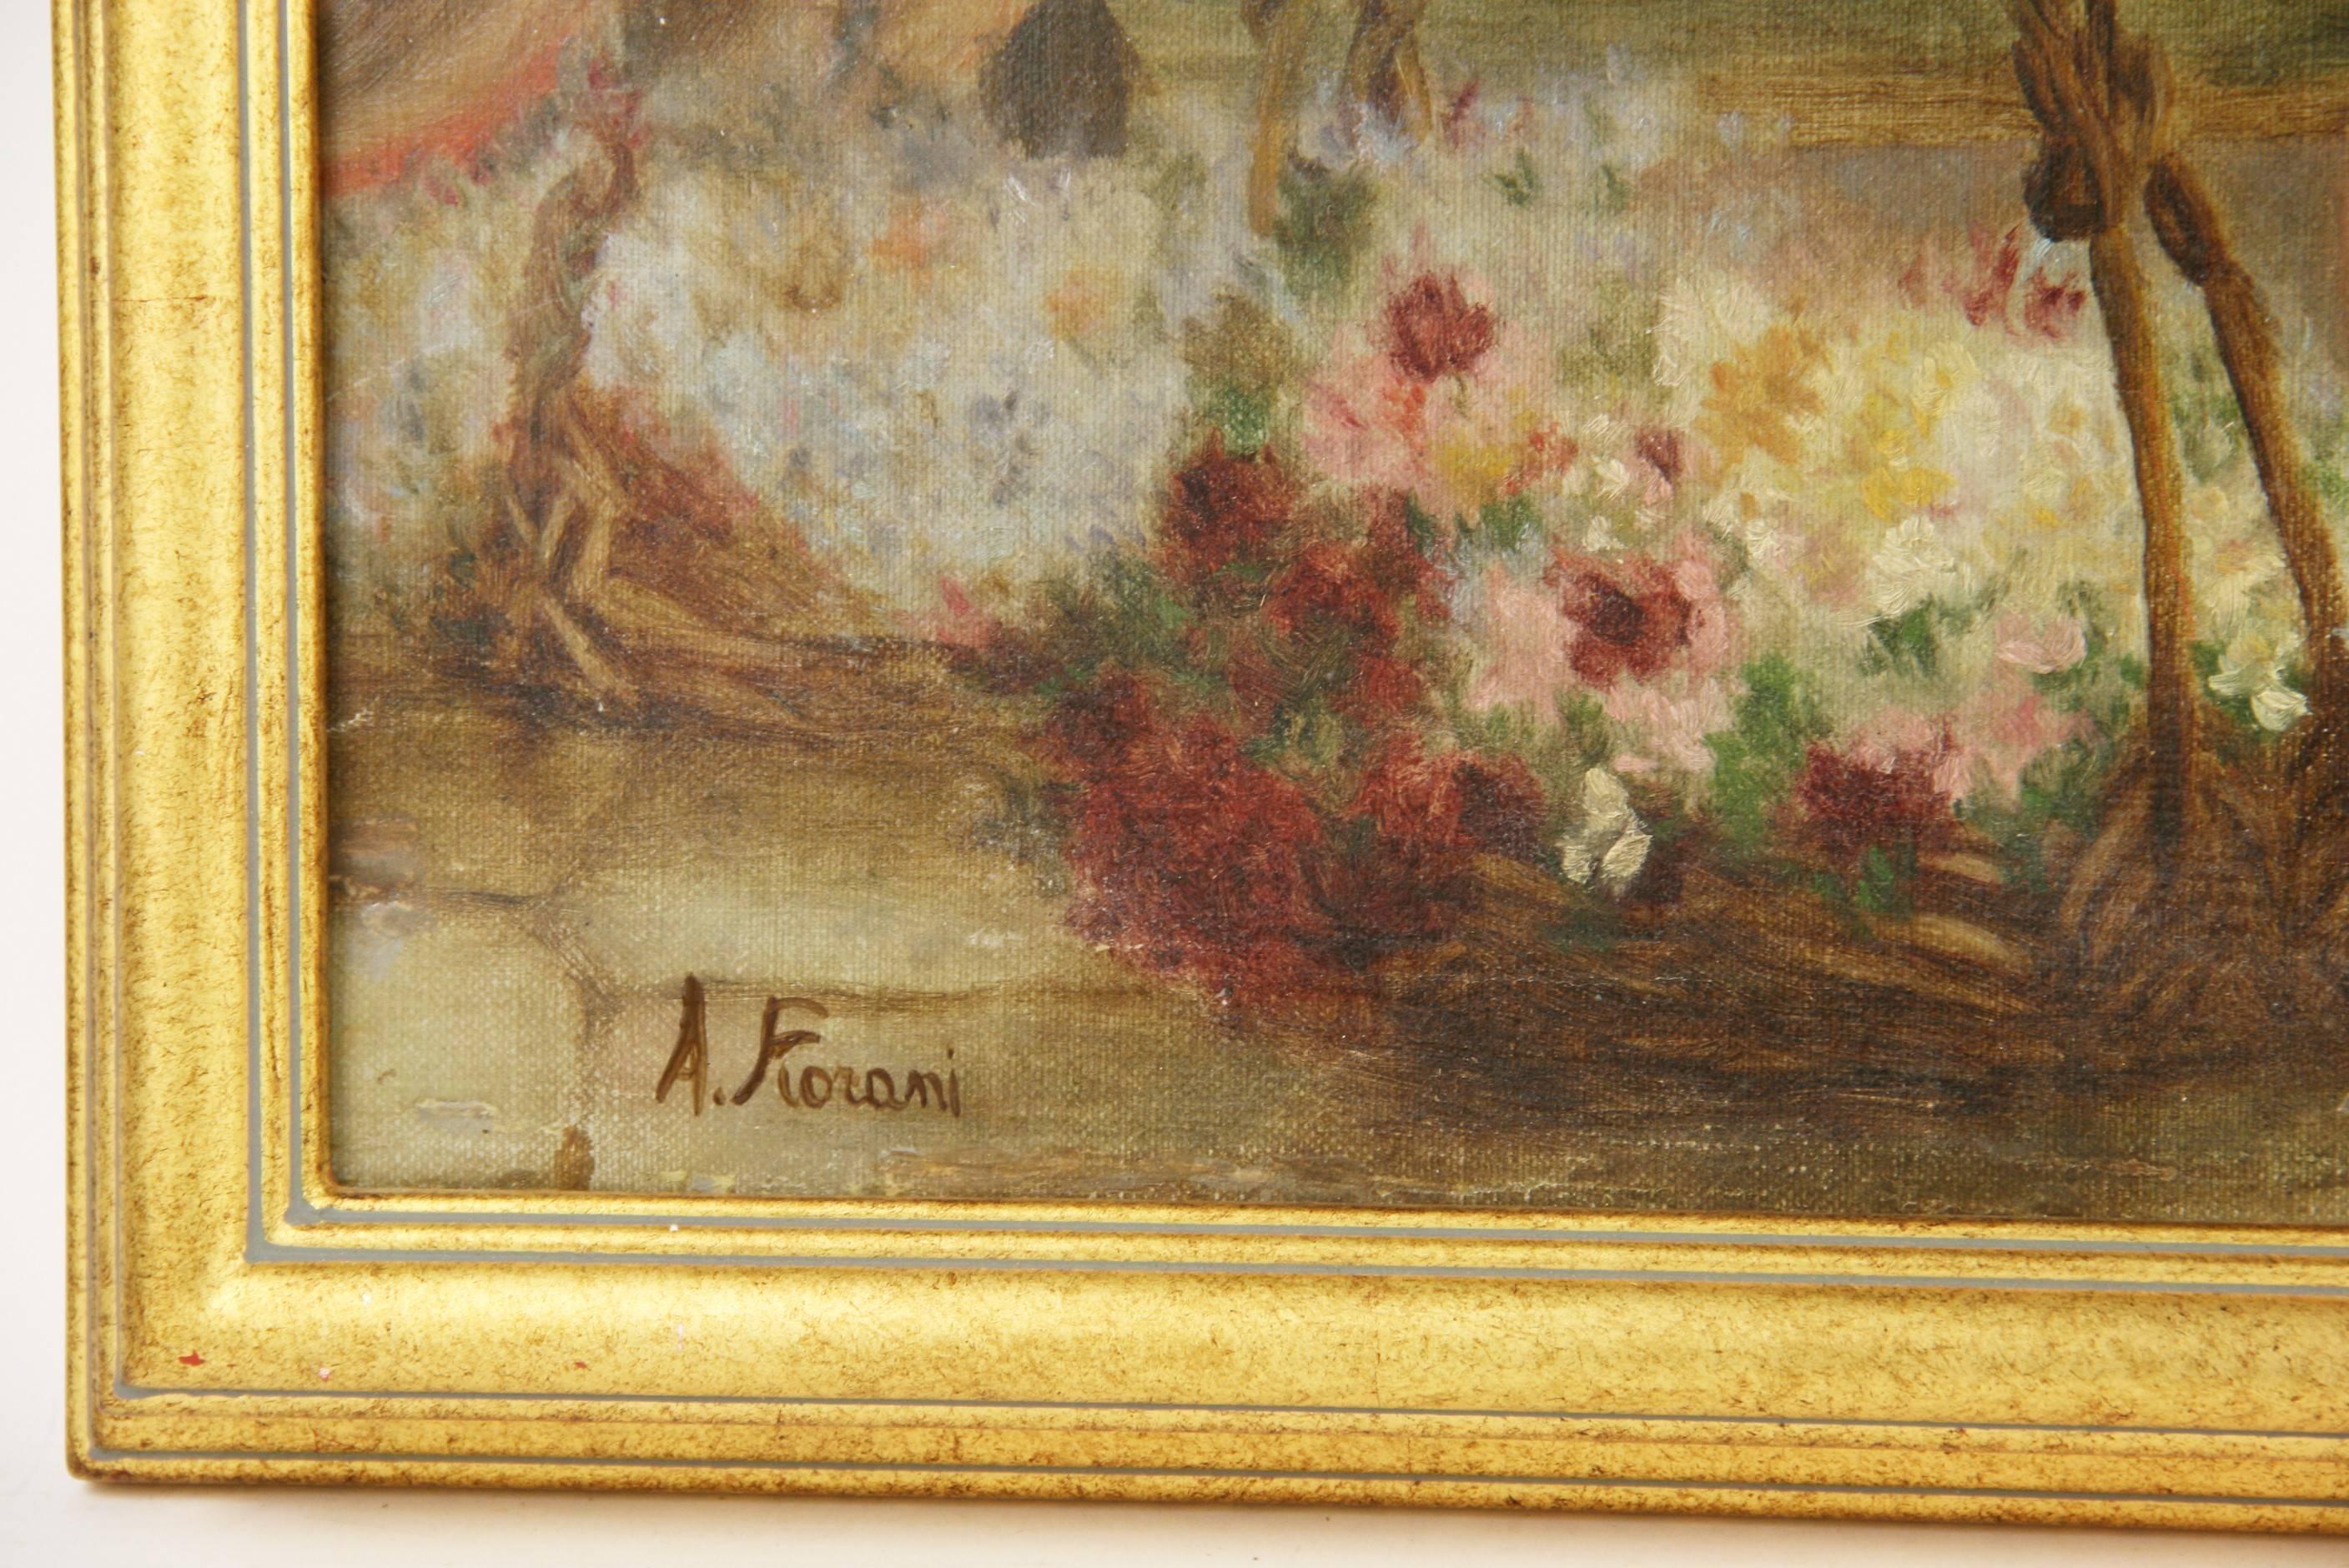 #5-2777 Circa 1940's, Italian classical oil painting on artist board depicting a woman selling flowers .Displayed in a gilt wood frame,signed lower left by A.Fiorani